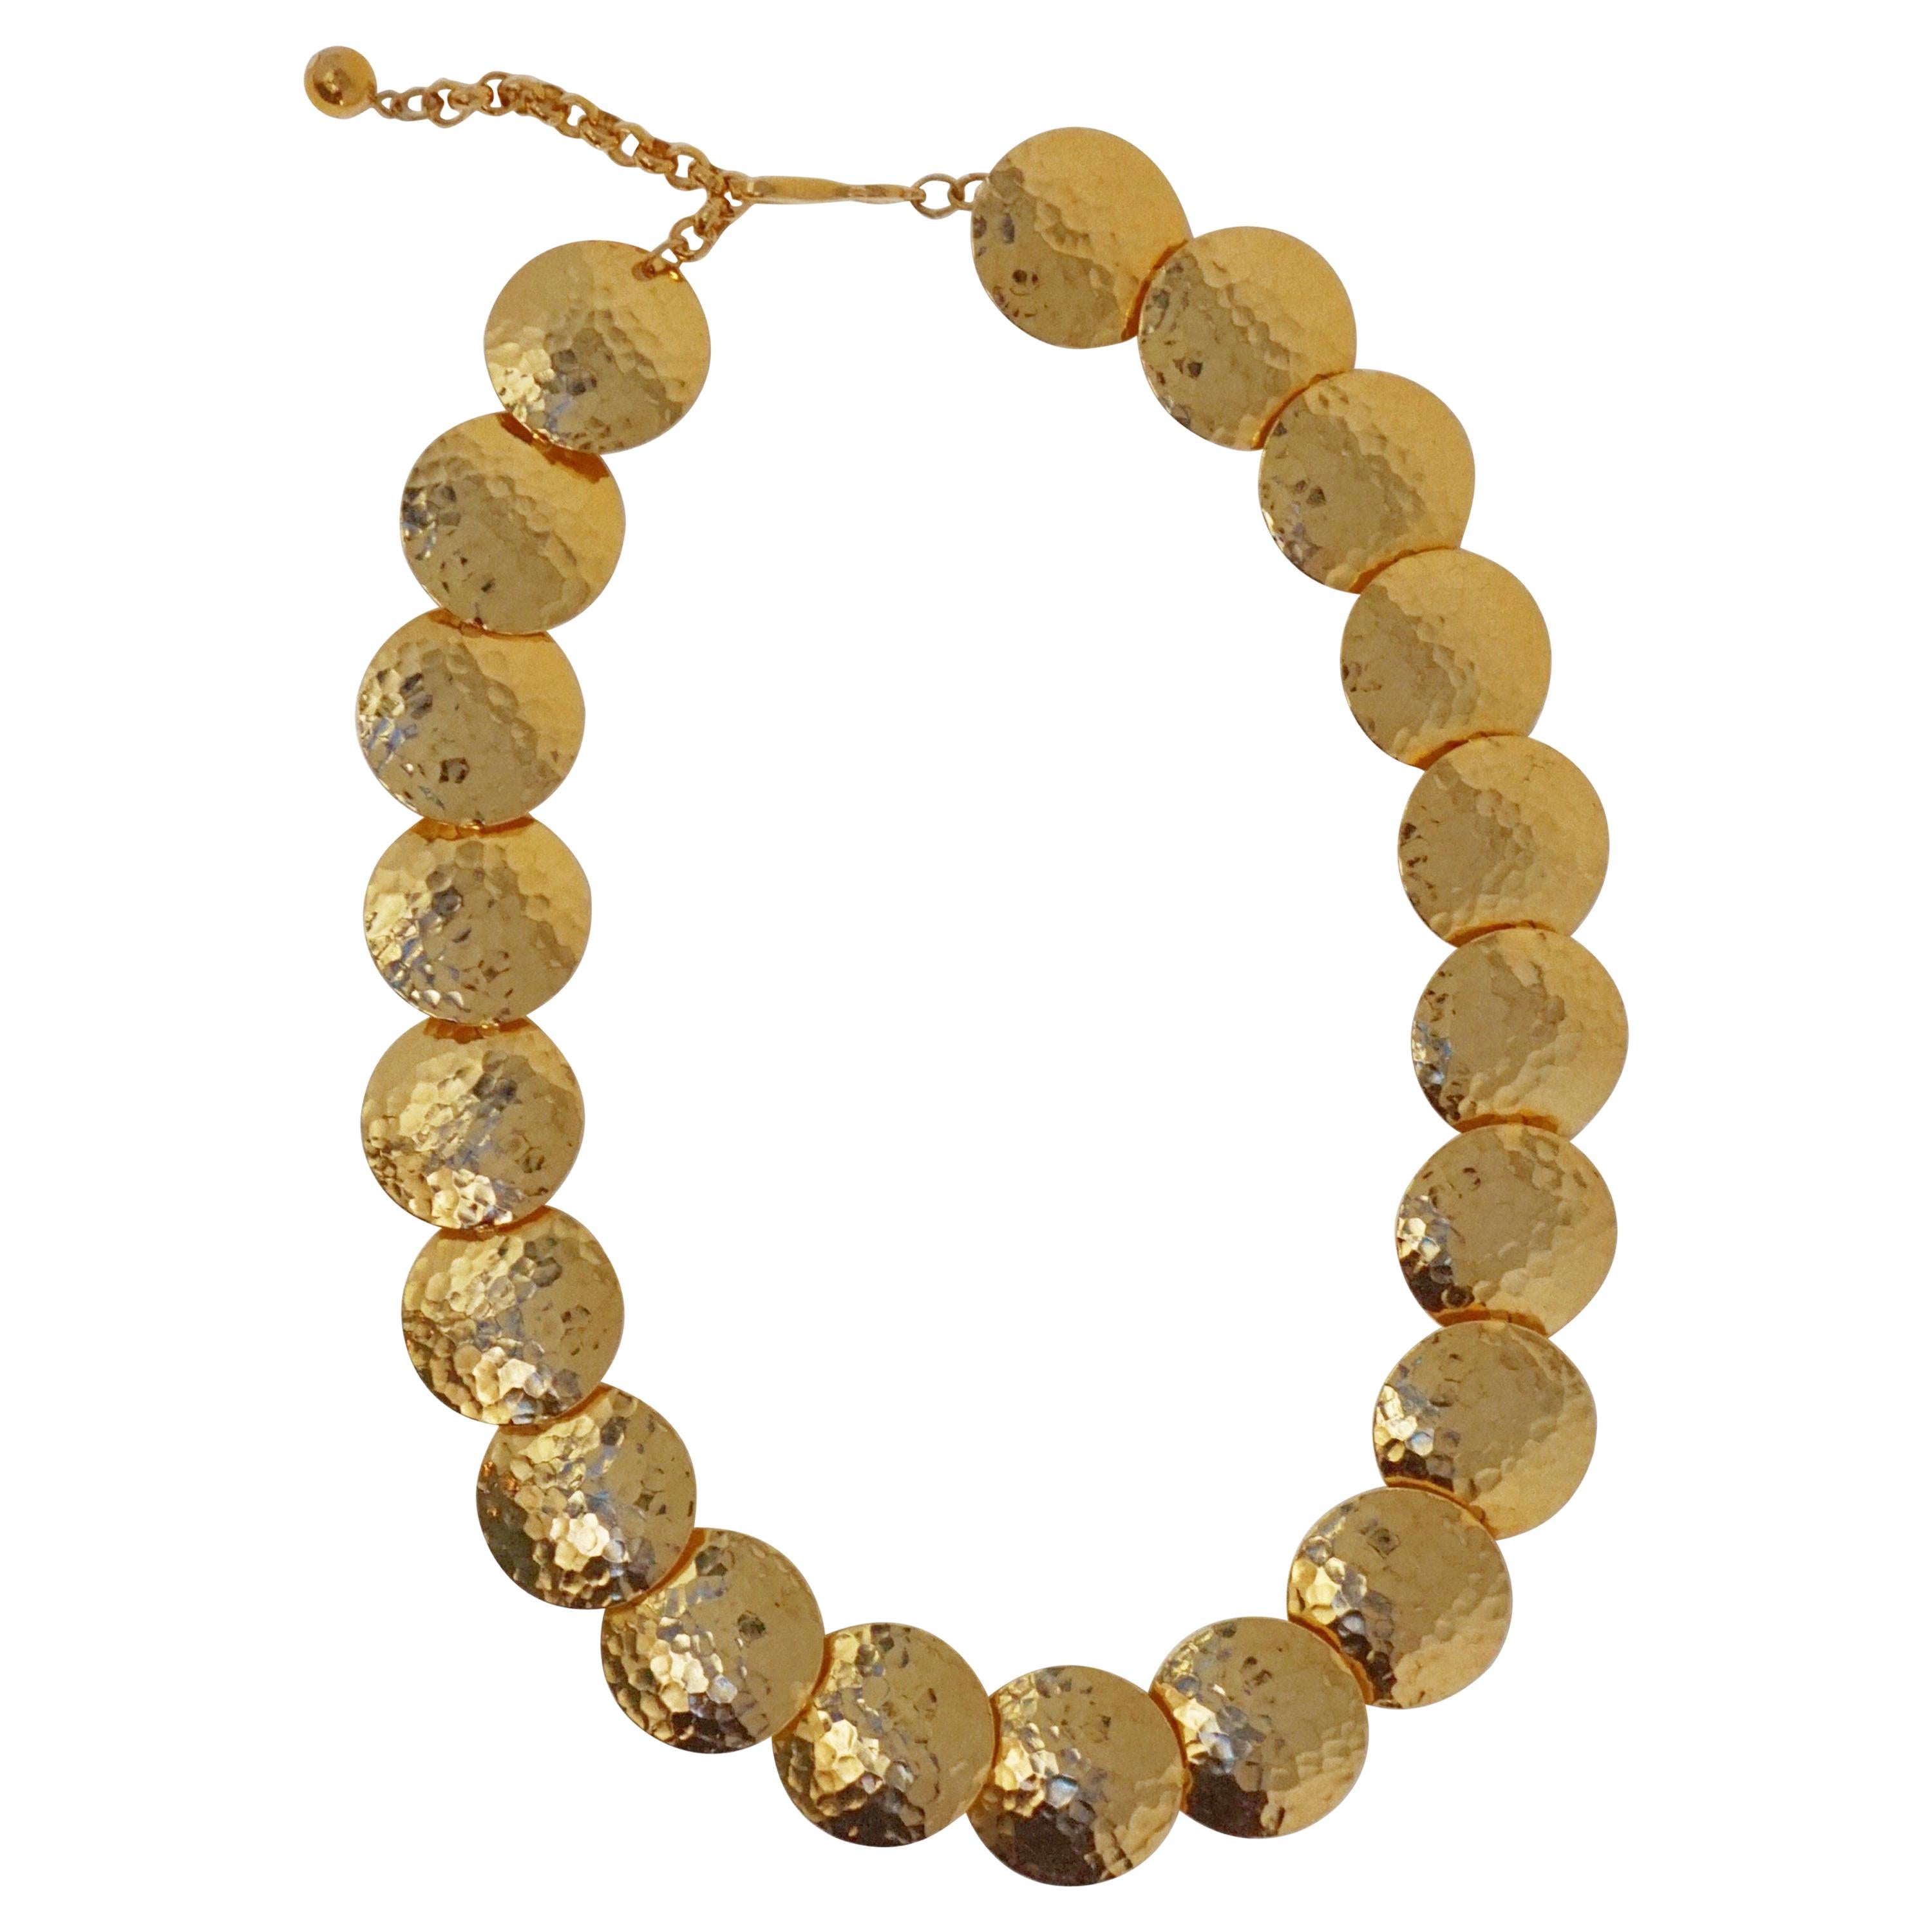 Gilt Hammered Disc Statement Necklace by Napier, Signed, circa 1980